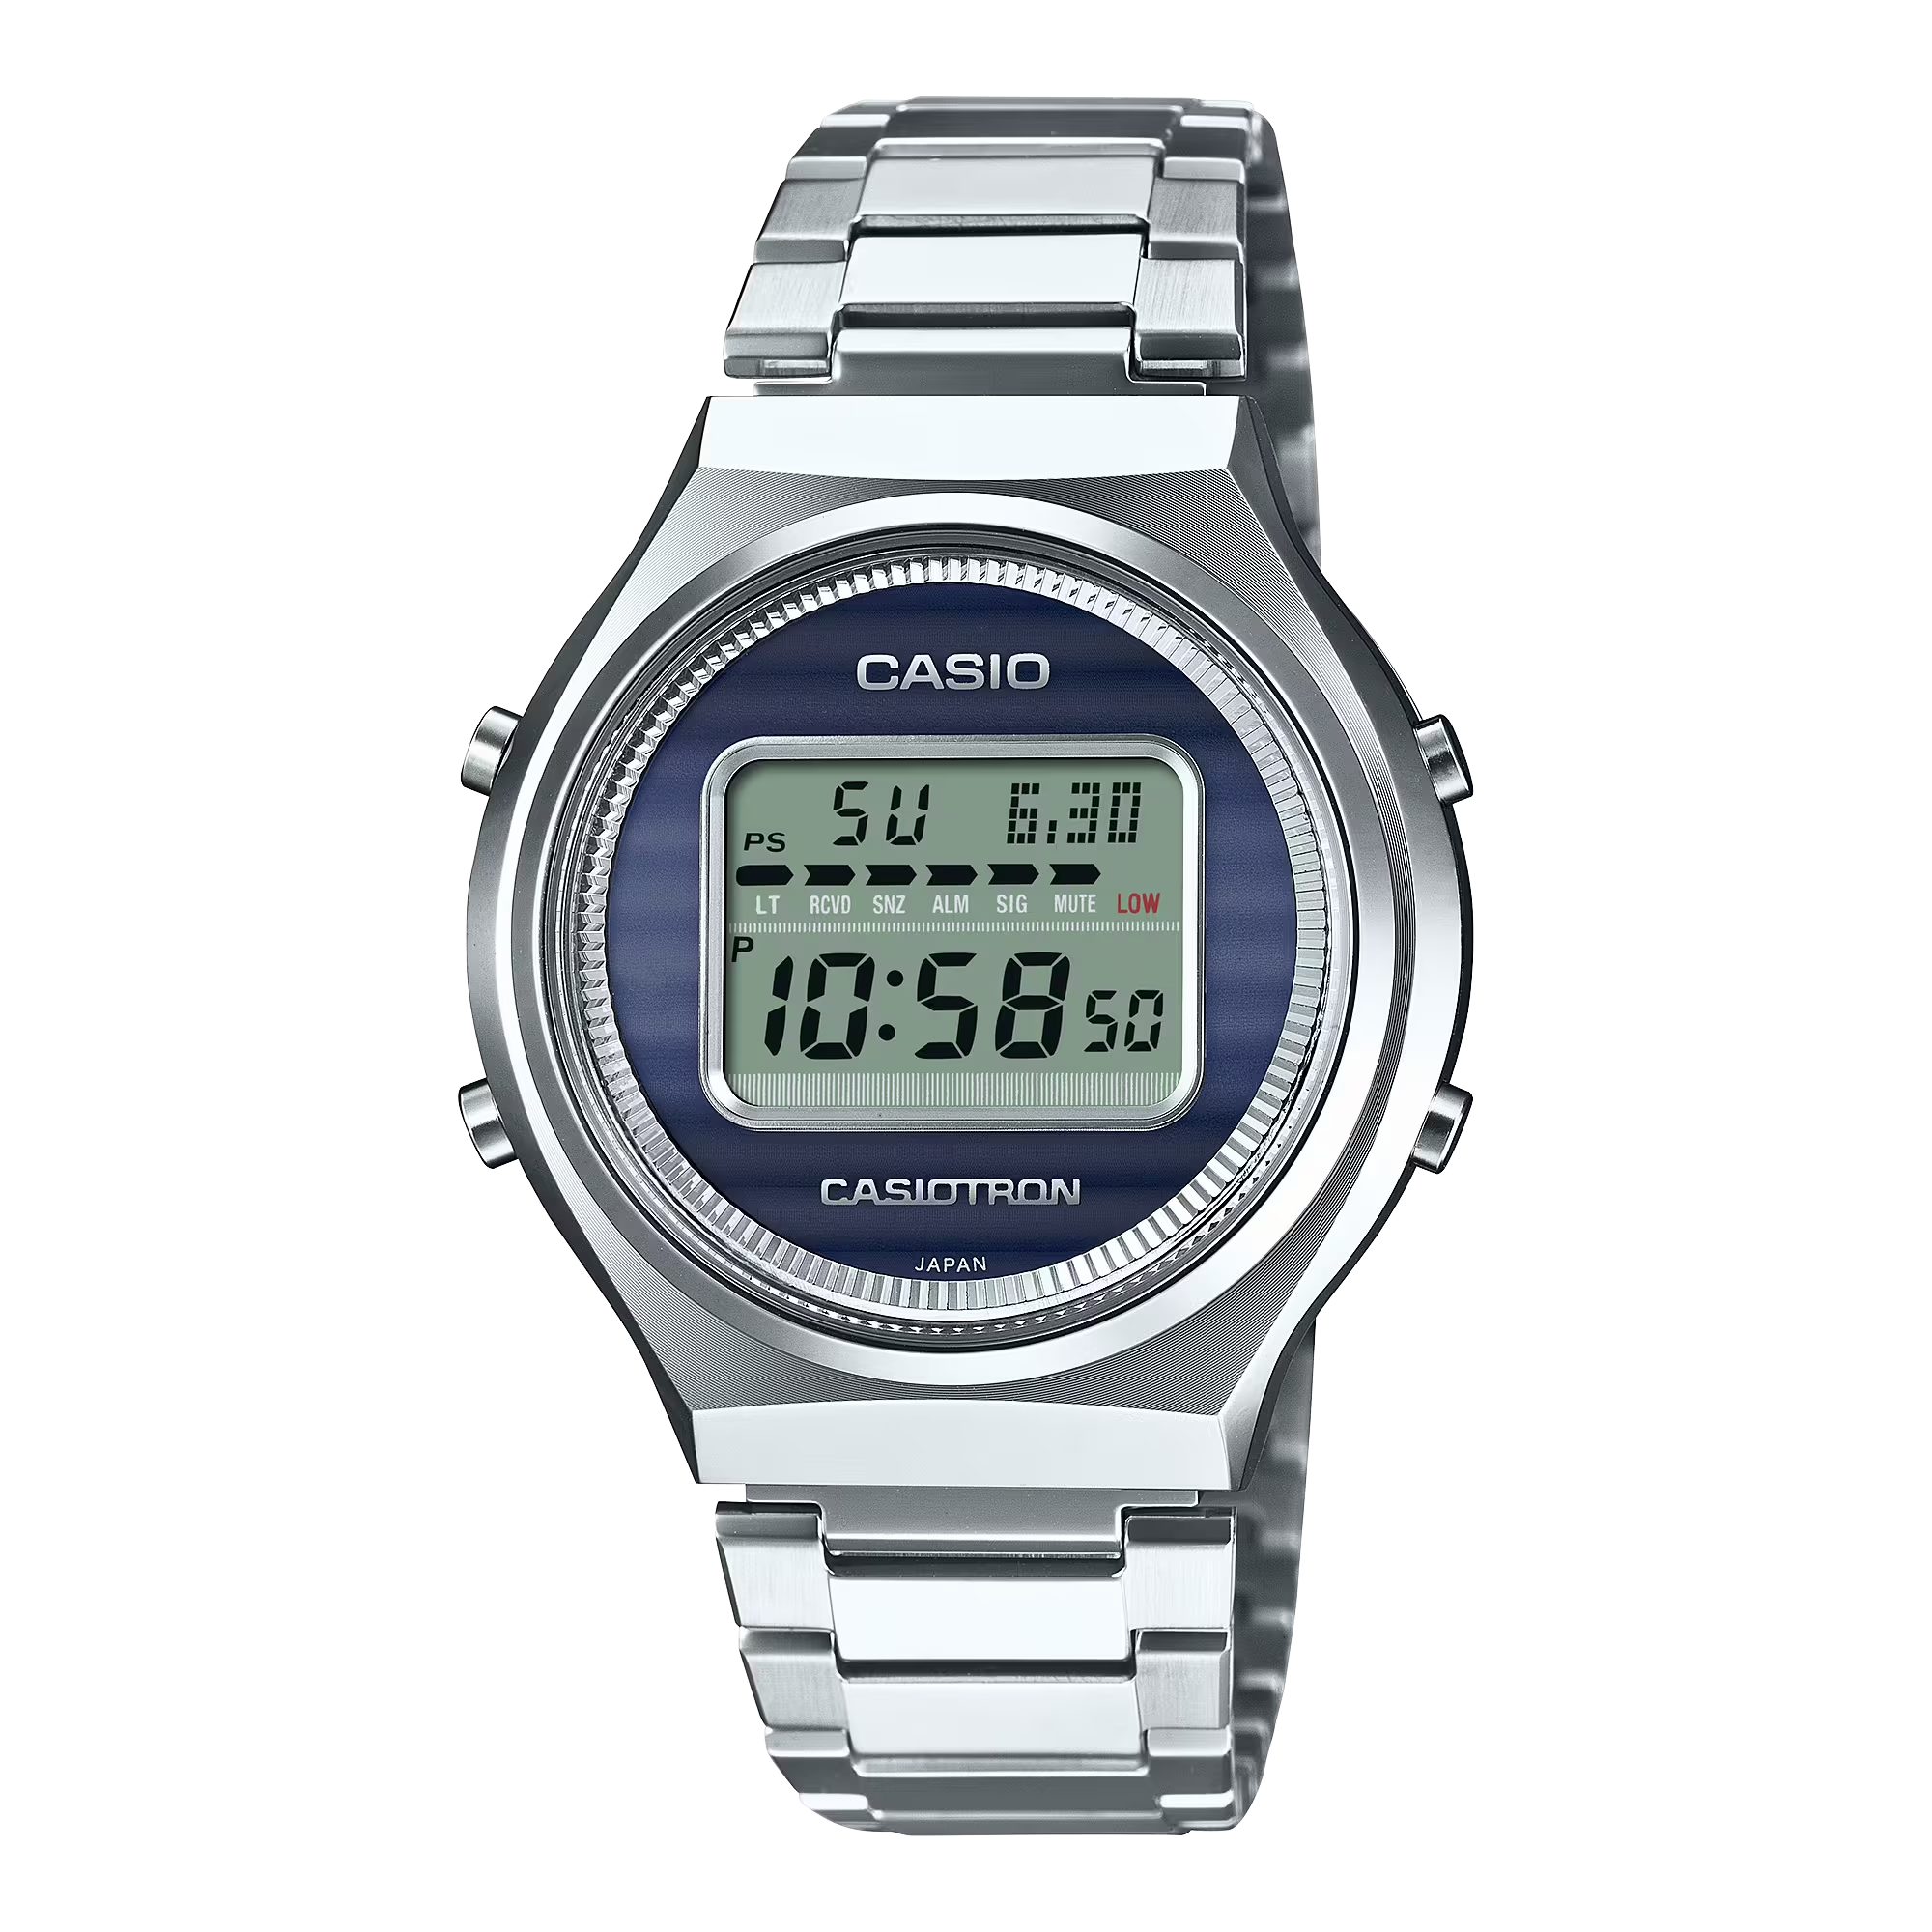 Casio TRN50-2A Casiotron Limited Edition Re-creation 50th Anniversary